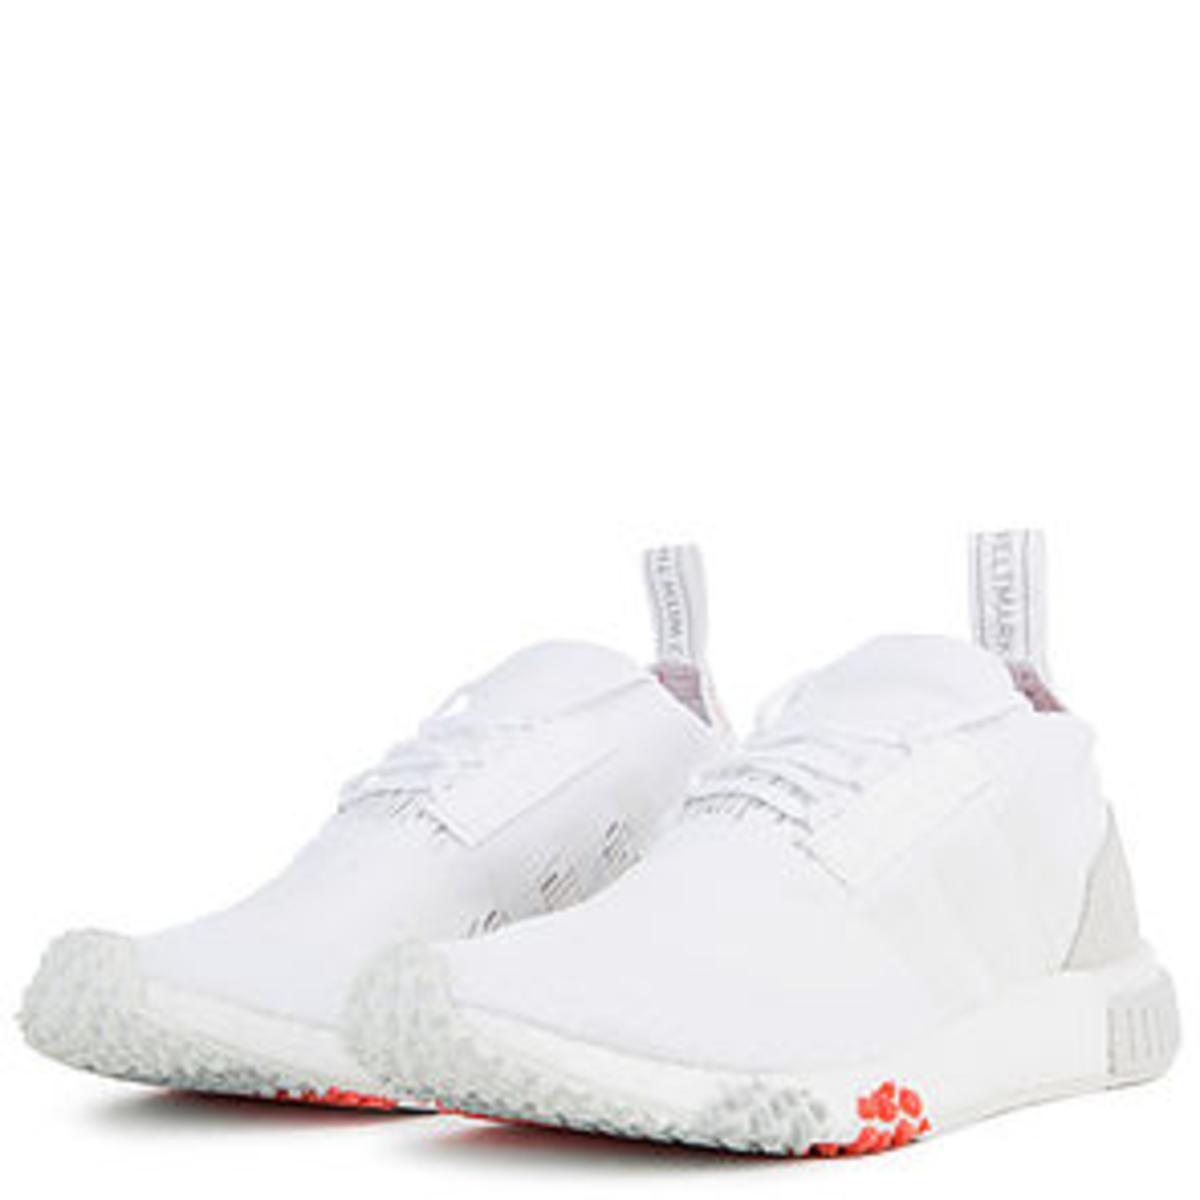 The Women's NMD Racer Primeknit in White and Trace Scarlet